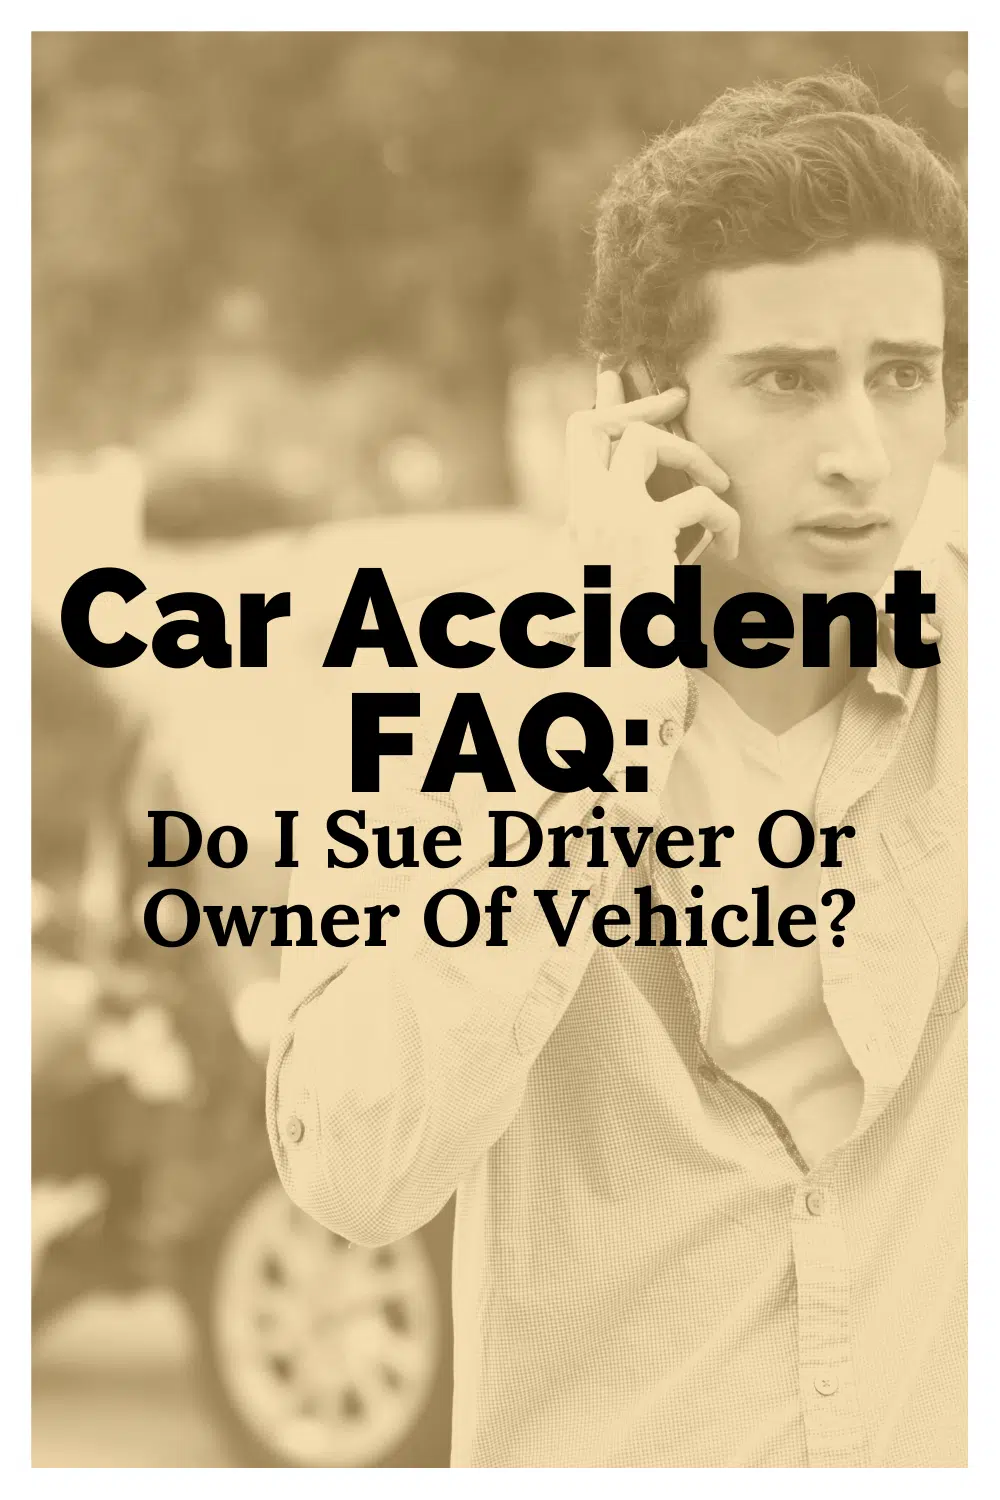 Car Accident FAQ: Do I Sue Driver Or Owner Of Vehicle?